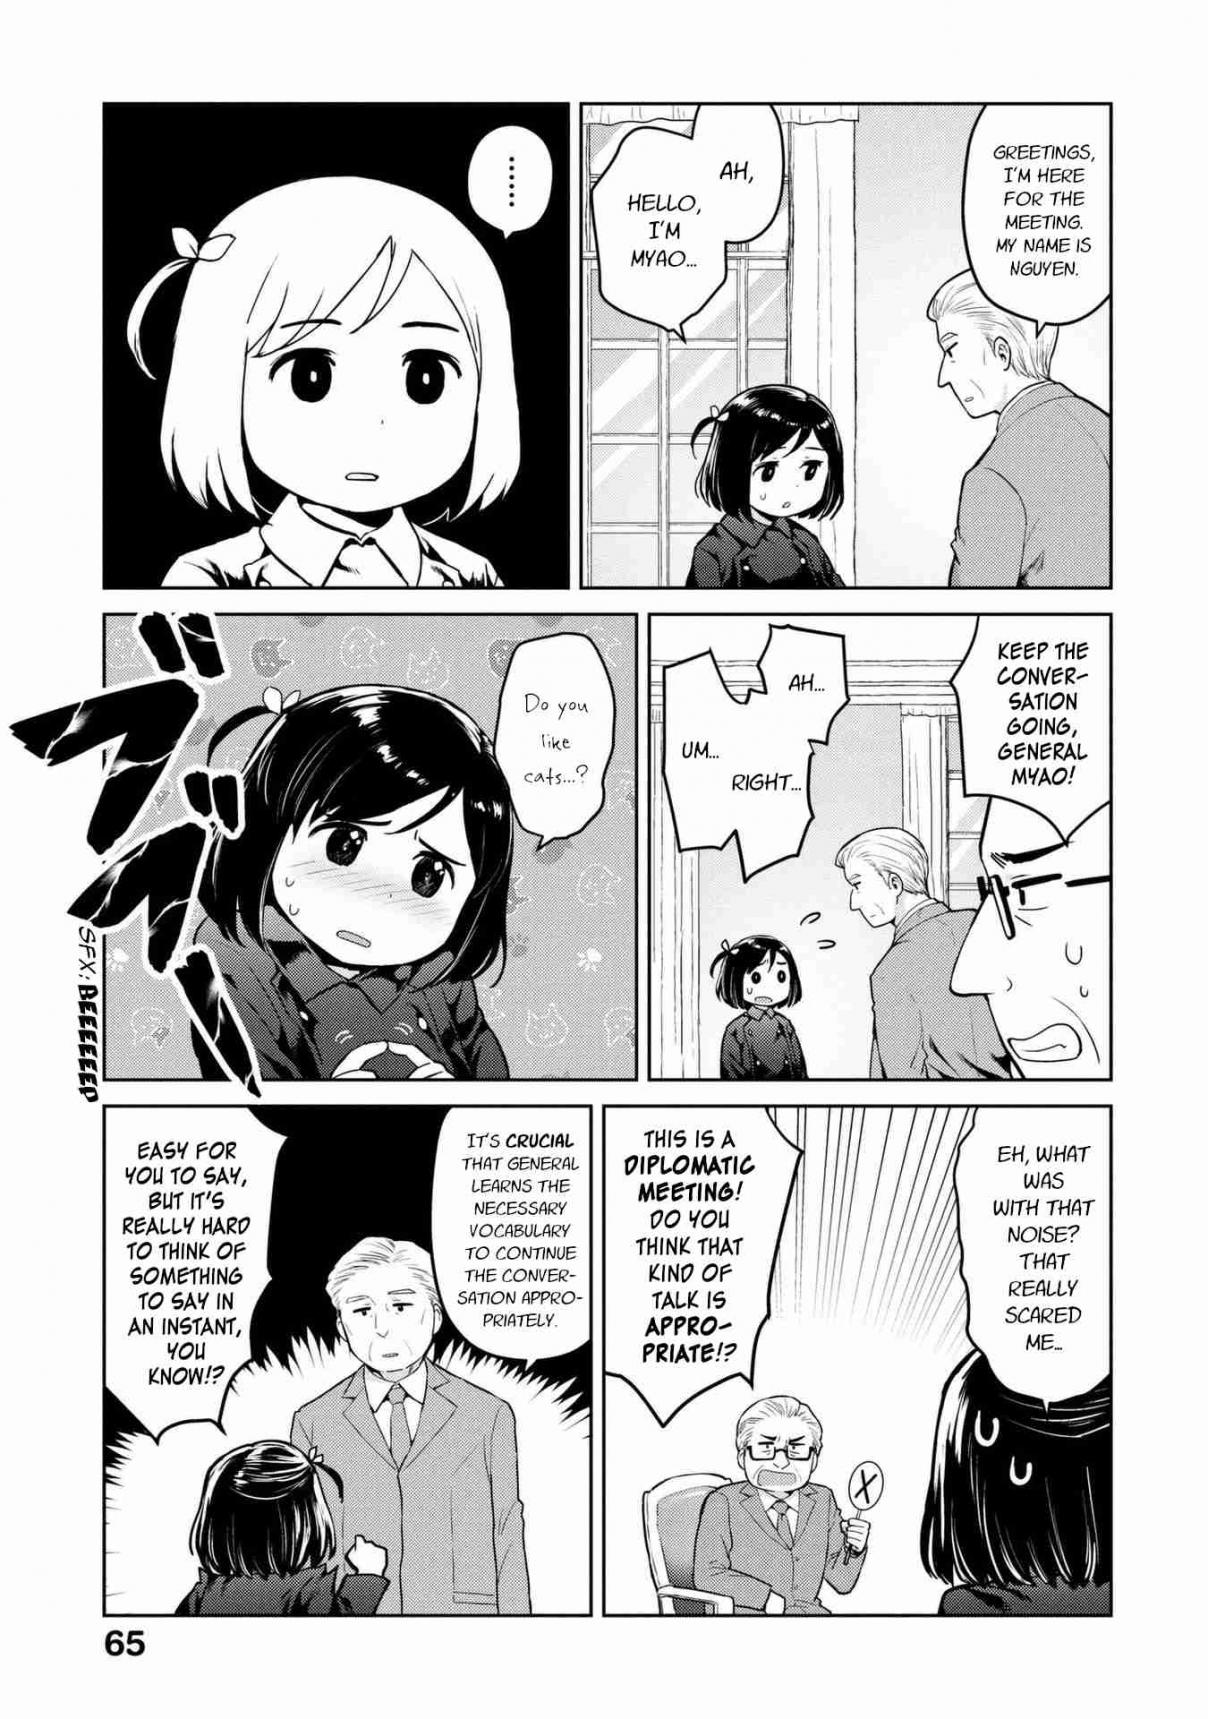 Oh, Our General Myao Vol. 1 Ch. 7 In Which Myao Gets Diplomatic